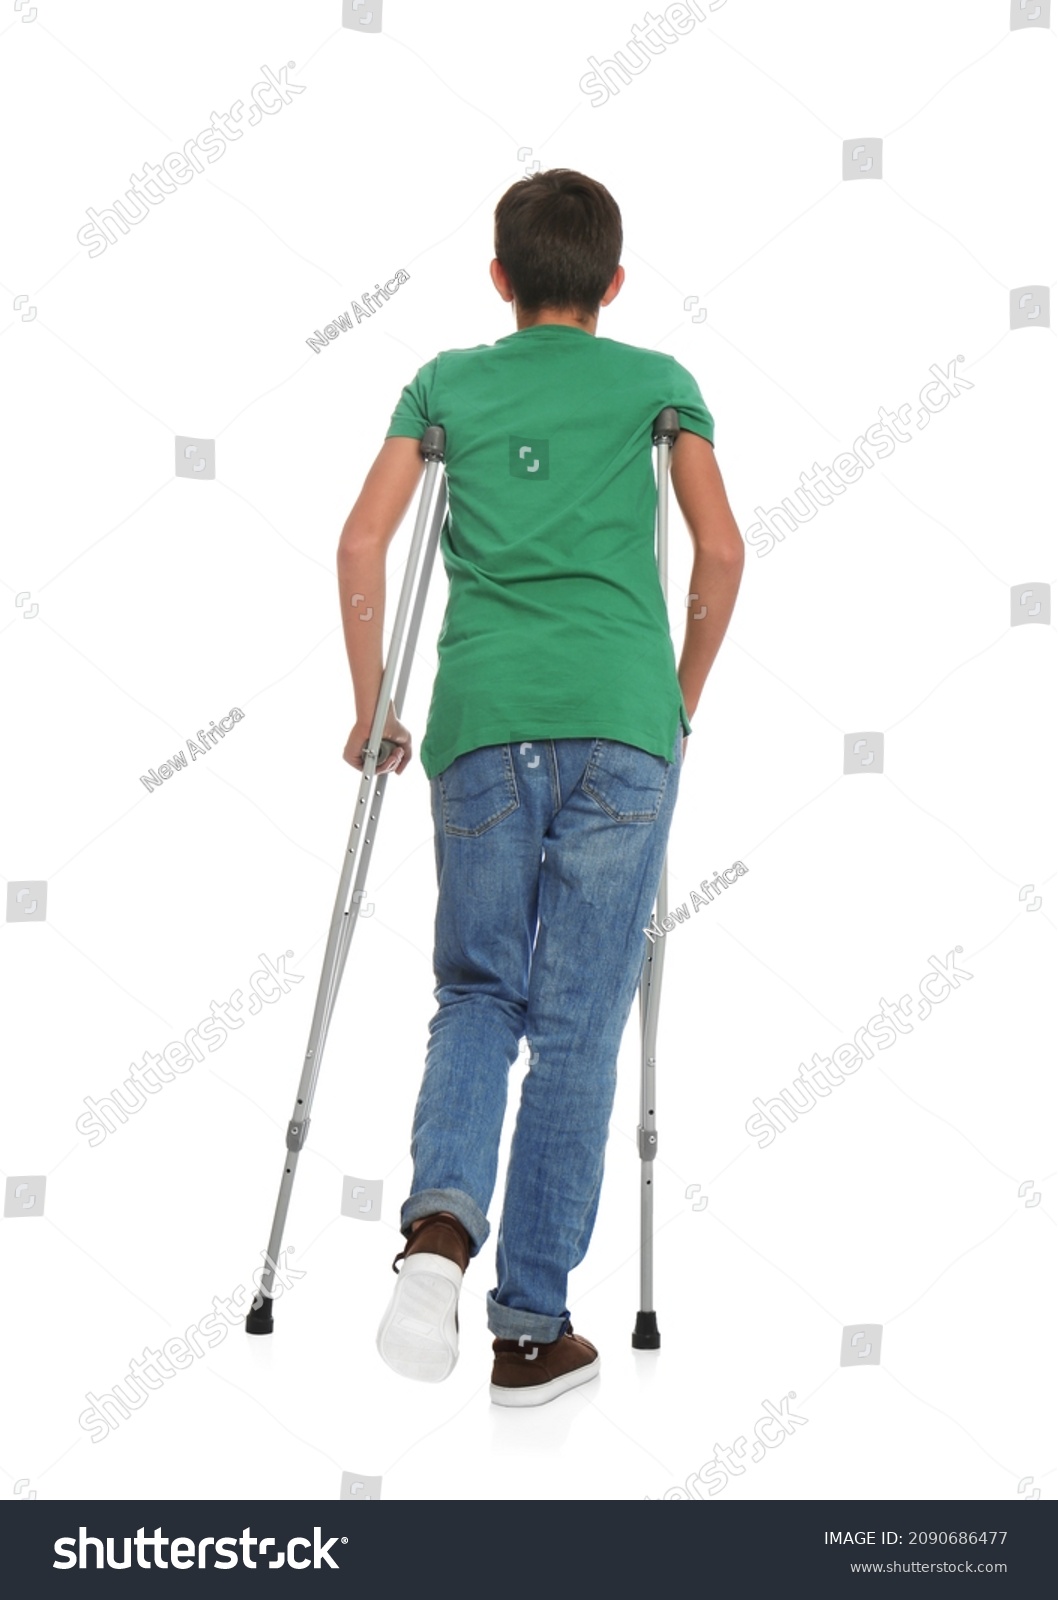 Teenage boy with injured leg using crutches on white background, back view #2090686477